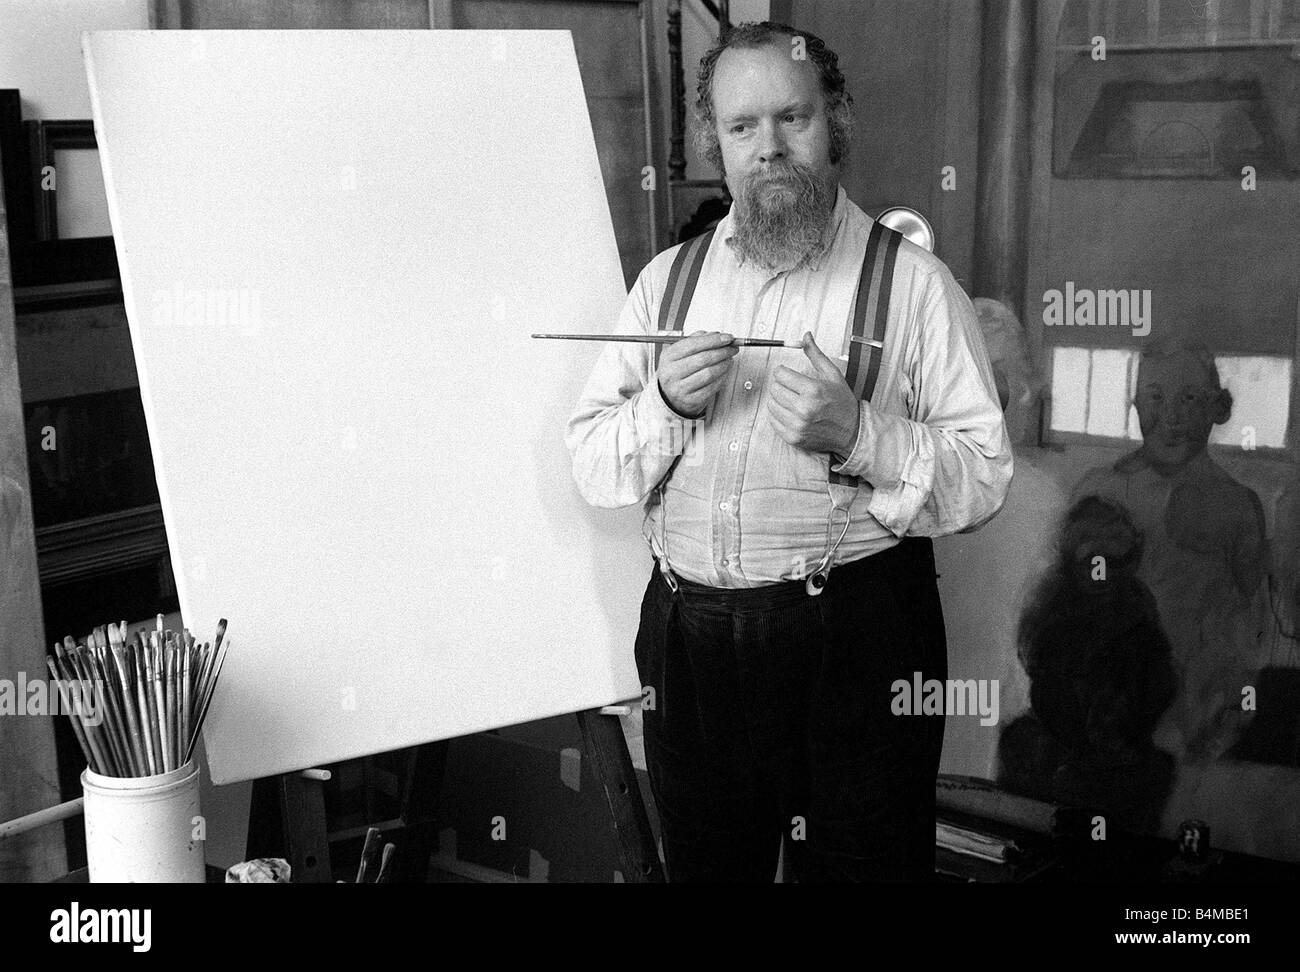 Peter Blake July 1977 Artist in his studio with works including Tantania Stock Photo